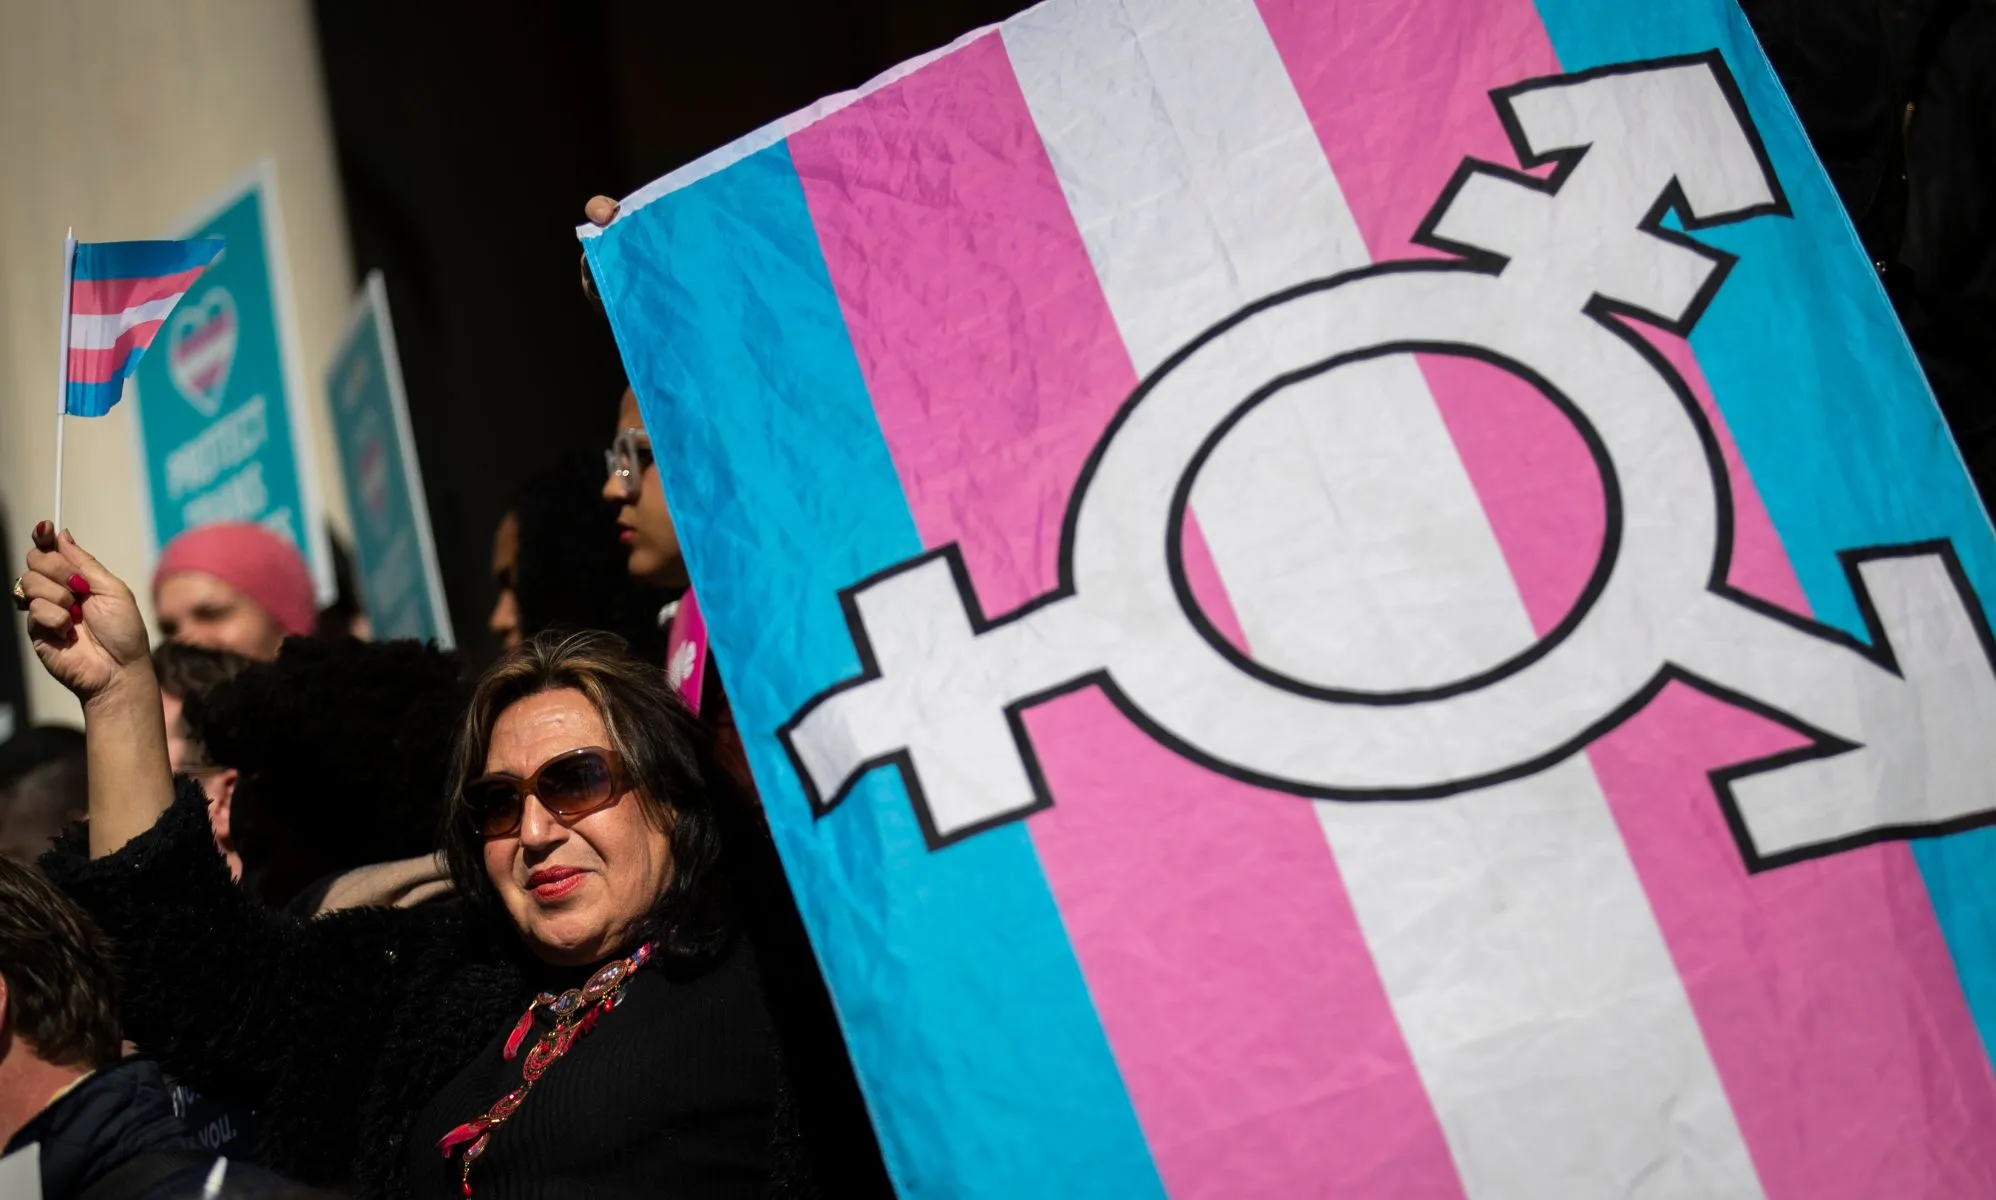 World’s largest psych organisation says ‘damaging’ gender affirming care bans are wrong